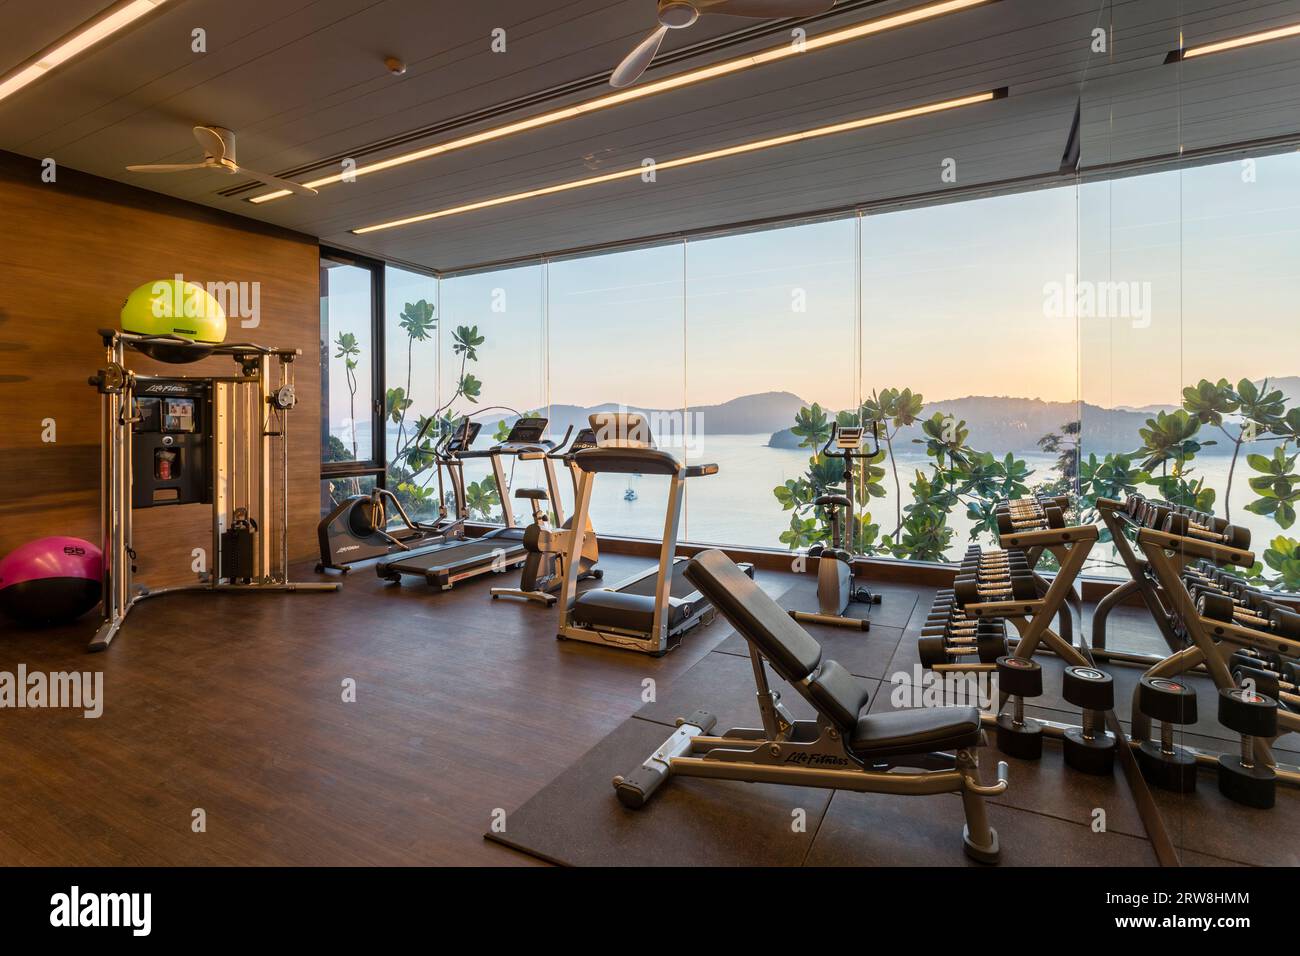 Phuket, Thailand - February 9, 2018: Interior of a home gym with fitness  equipment in a luxury villa in Phuket, Thailand Stock Photo - Alamy